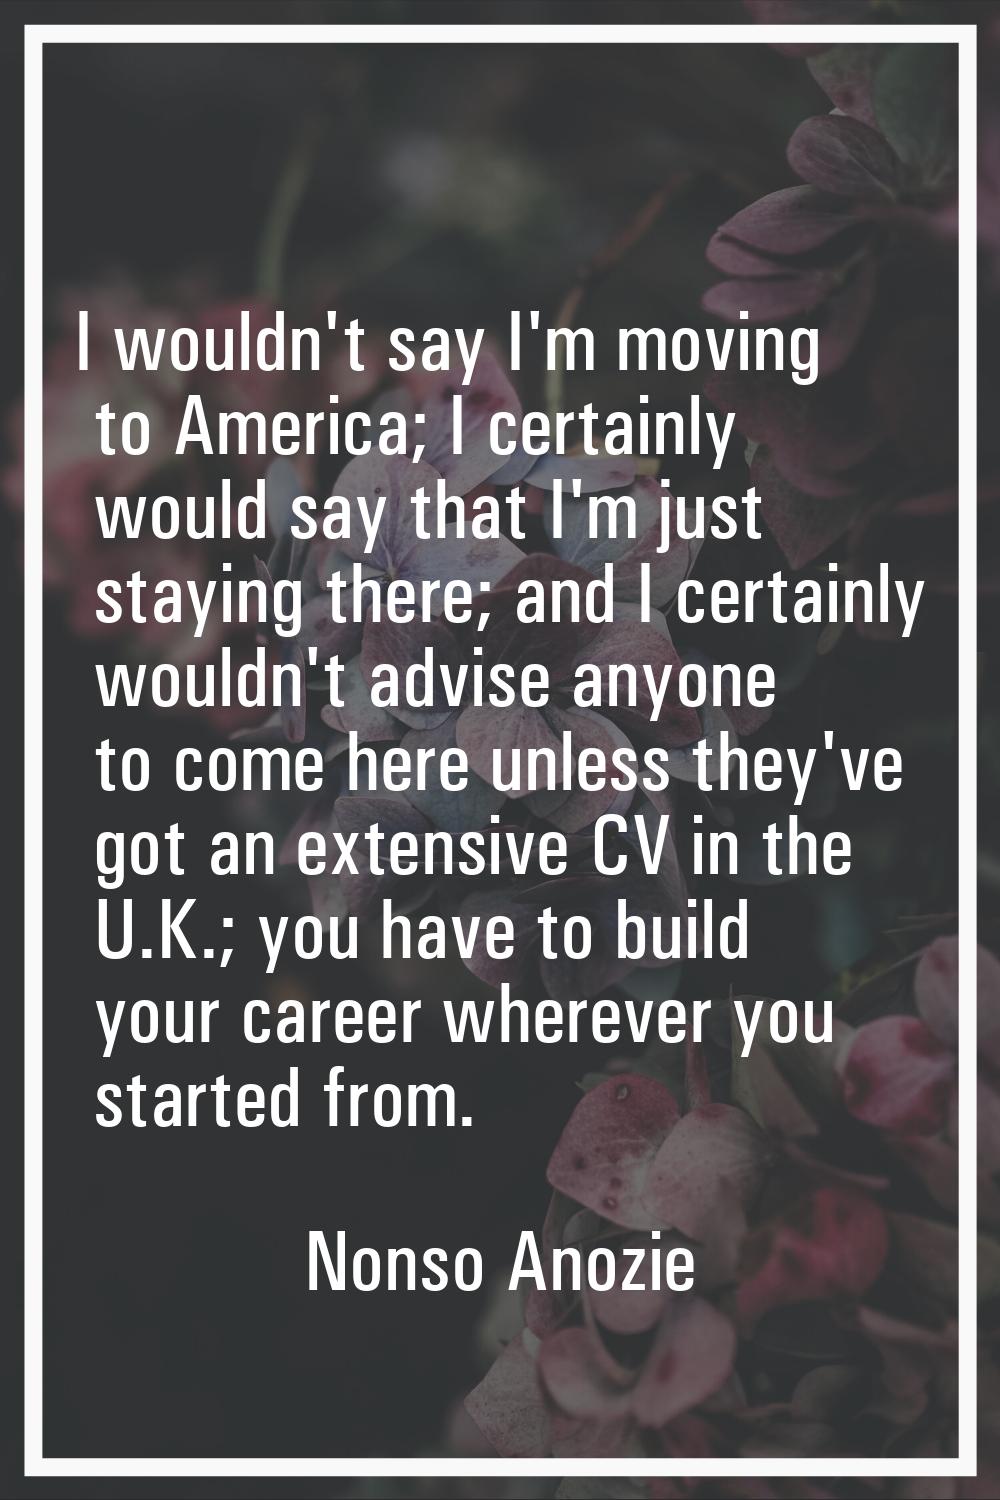 I wouldn't say I'm moving to America; I certainly would say that I'm just staying there; and I cert